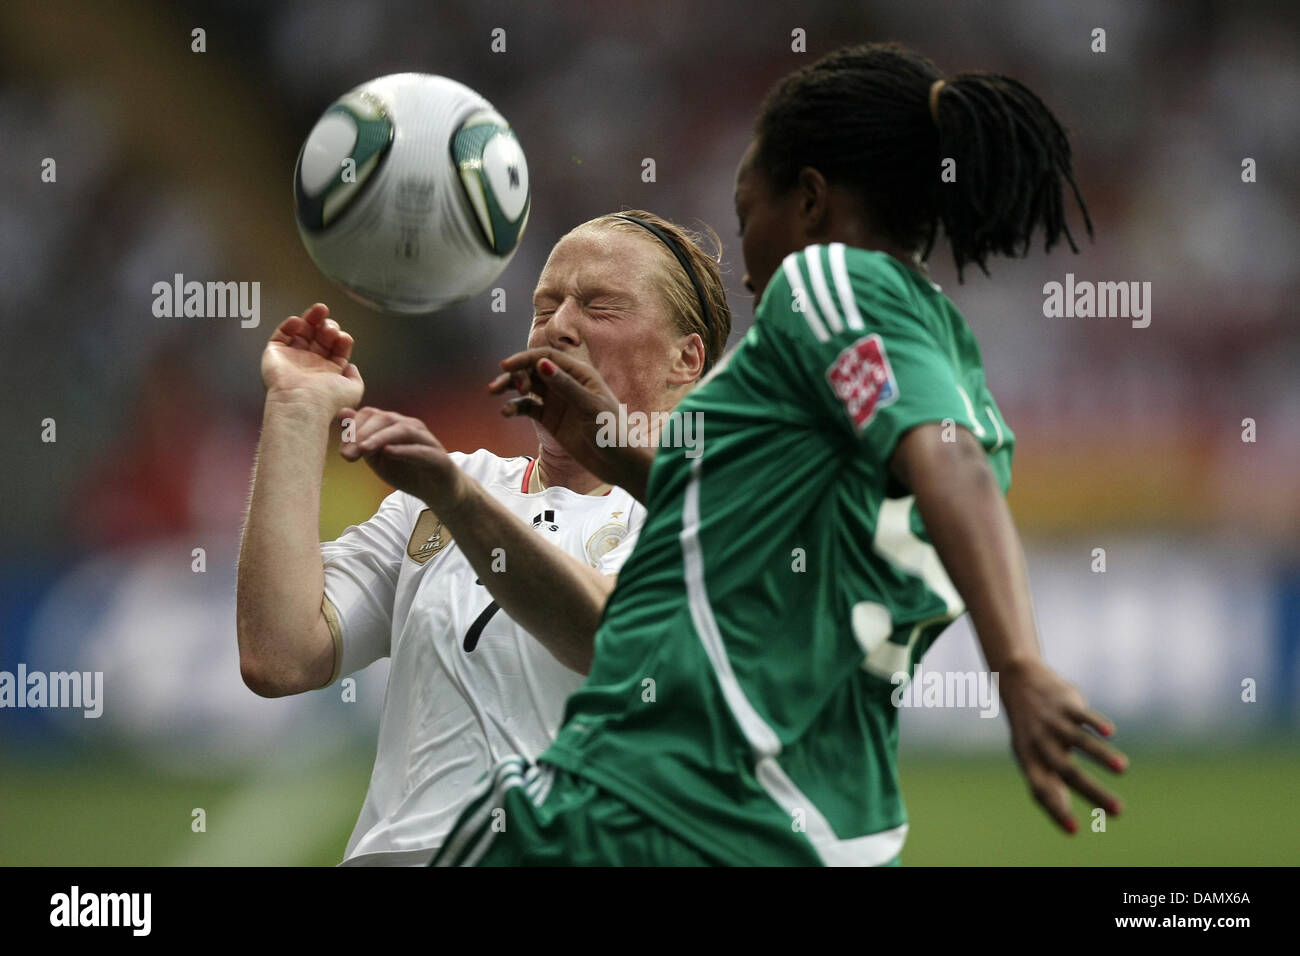 Melanie Behringer (l) of Germany and Onome Ebi of Nigeria fight for the ball during the Group A match Germany against Nigeria of FIFA Women's World Cup soccer tournament at the FIFA Women's World Cup Stadium in Frankfurt, Germany, 30 June 2011. Foto: Fredrik von Erichsen dpa/lhe Stock Photo